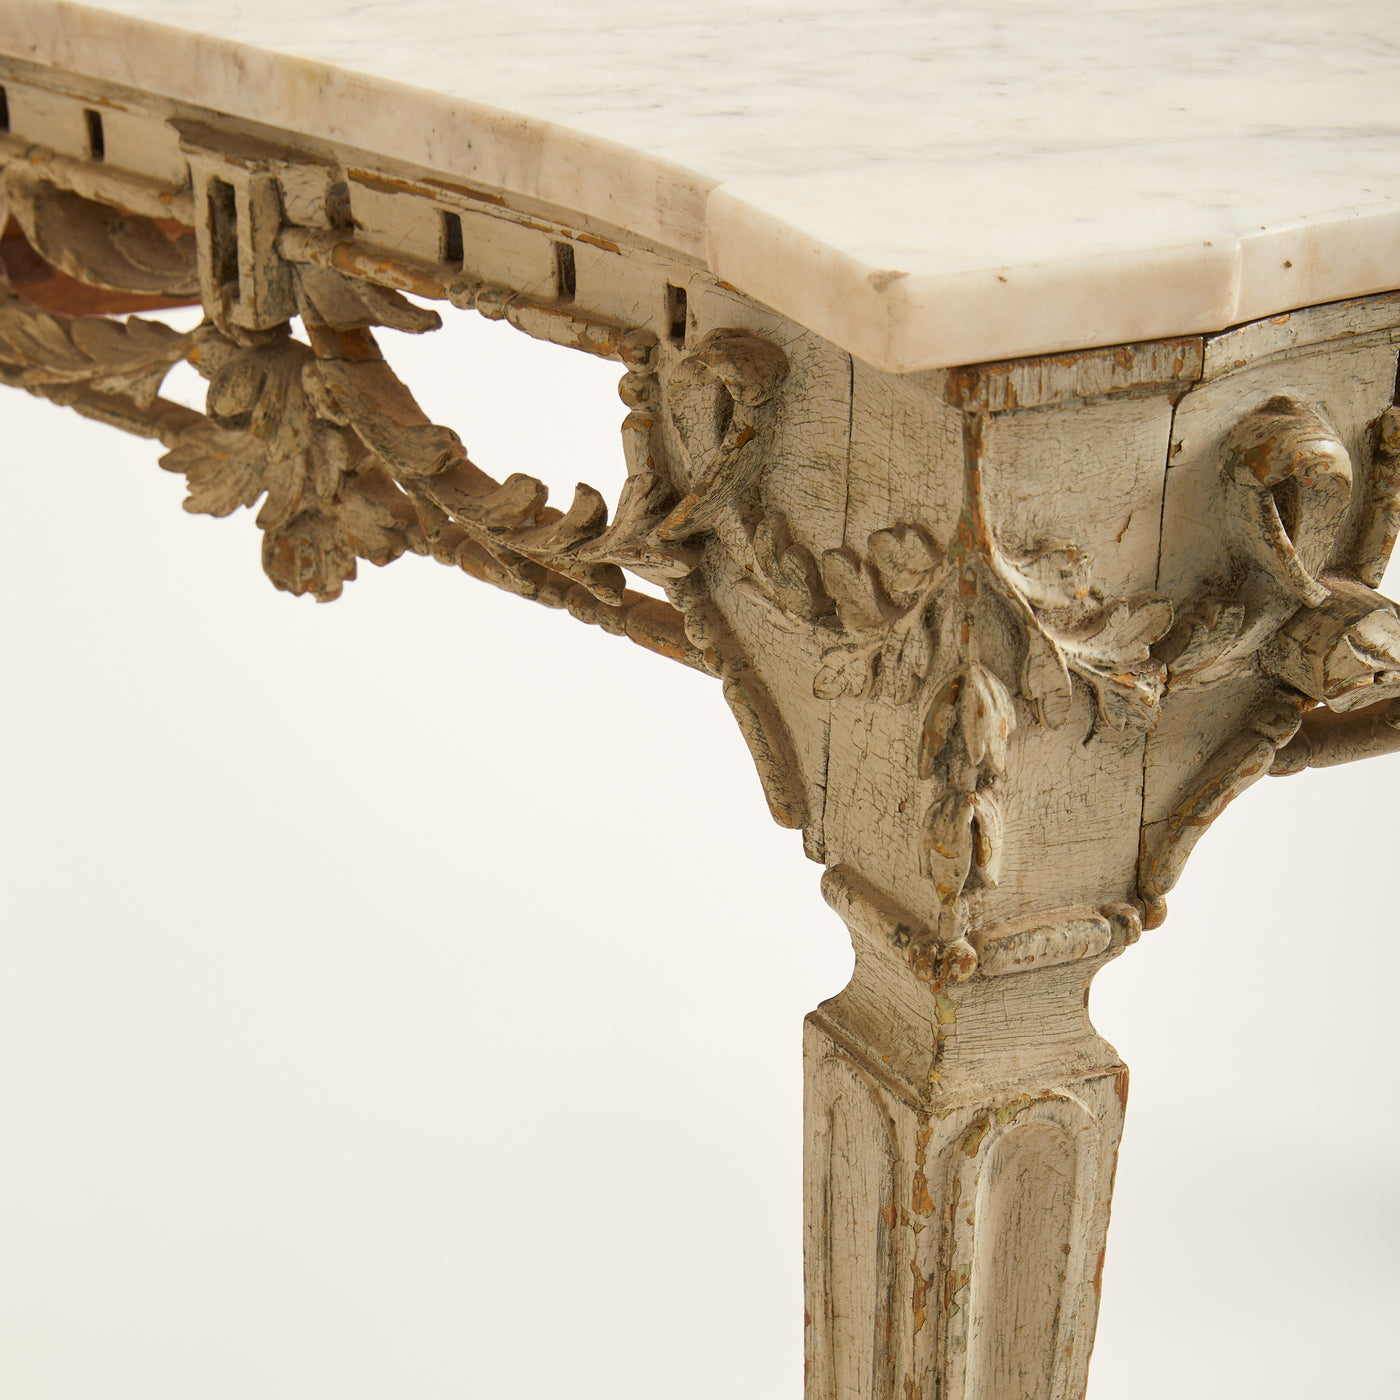 19th Century Console w/ Marble Top